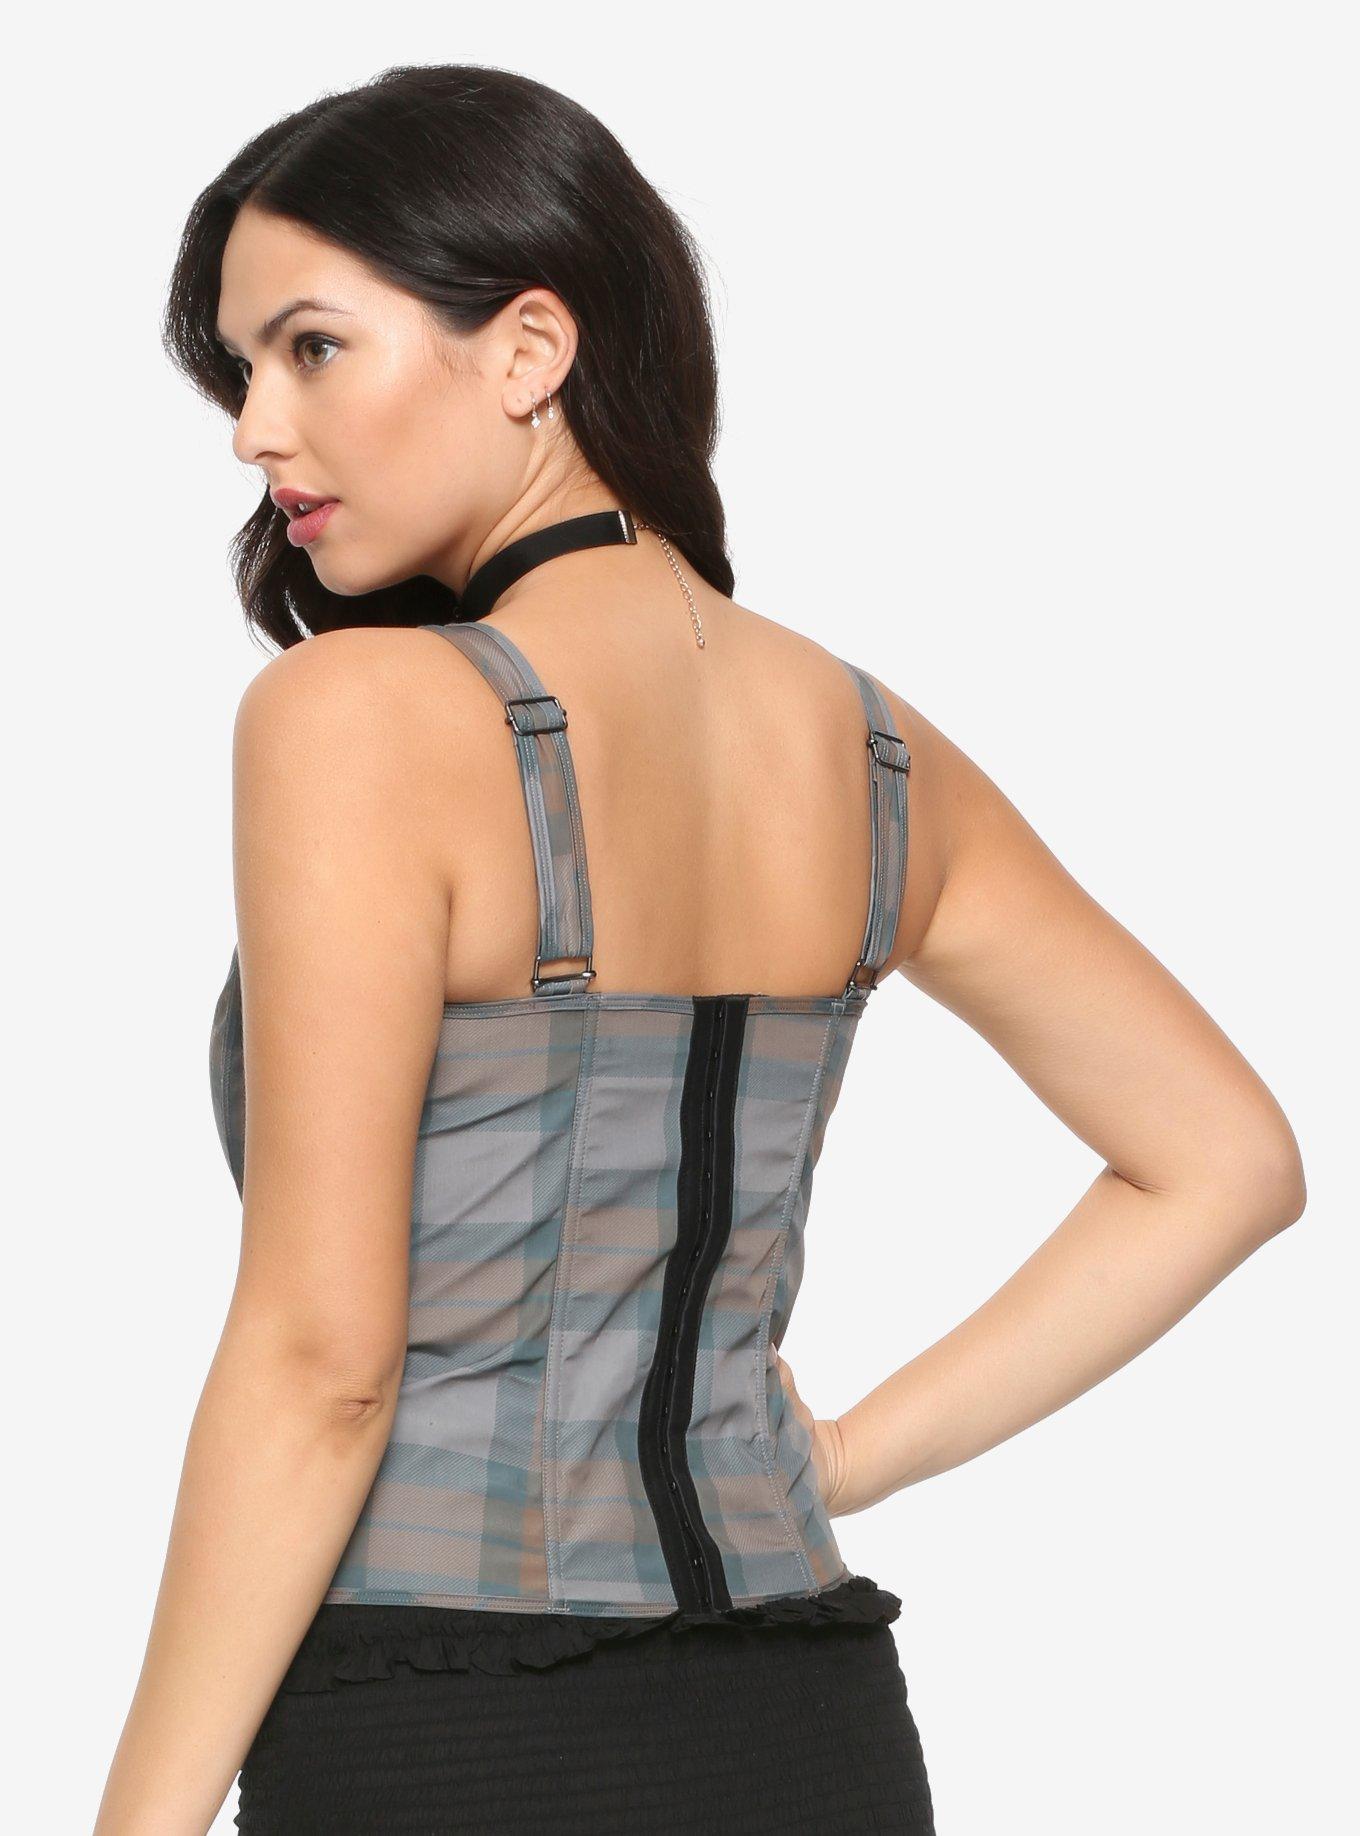 Outlander Tartan Lace-Up Corset Hot Topic Exclusive, GREY, alternate